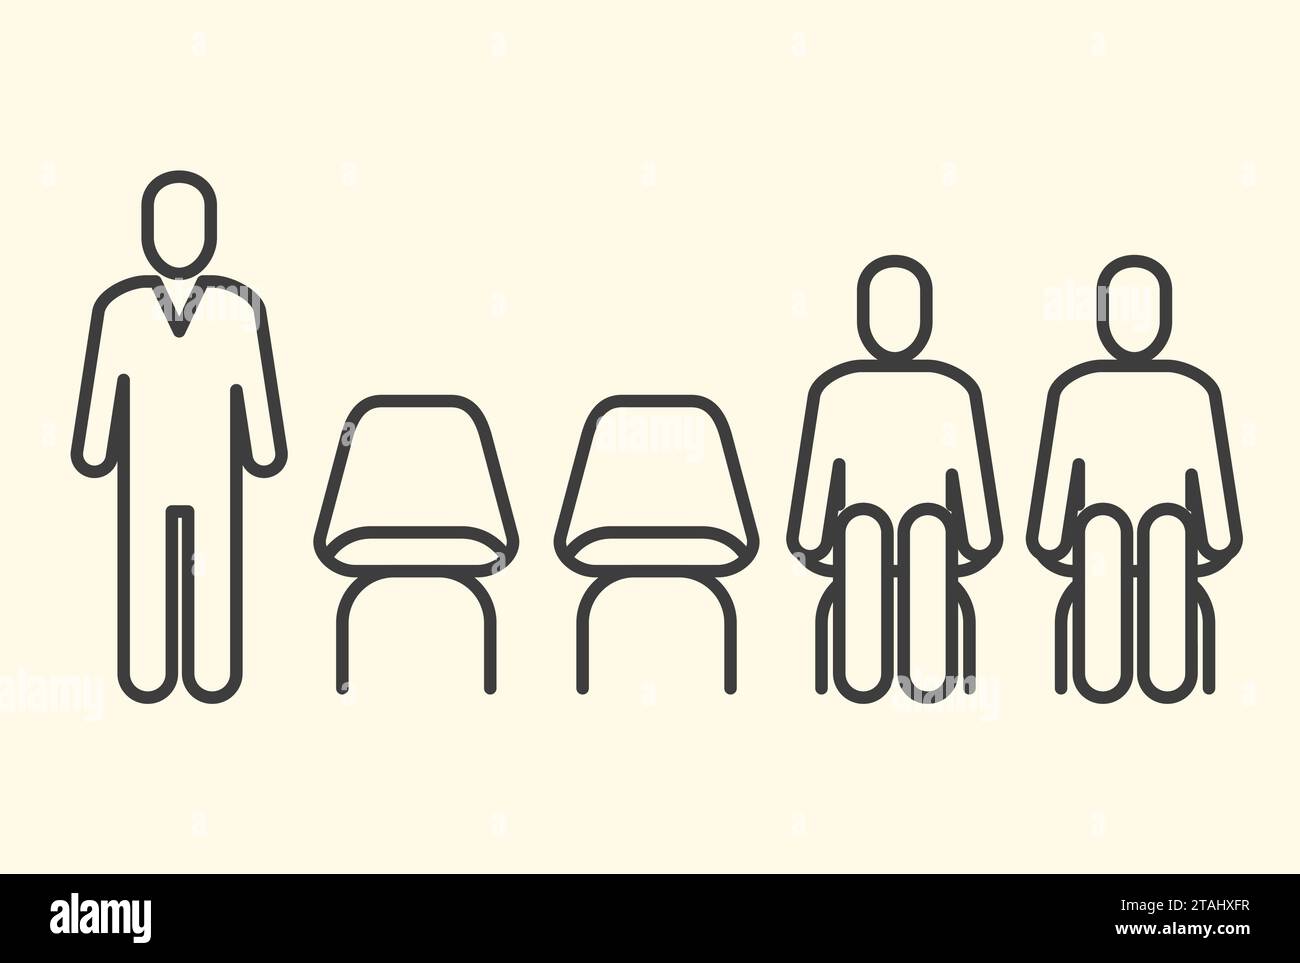 Waiting room icon, row of chairs and men sitting and standing in queue, vector Stock Vector